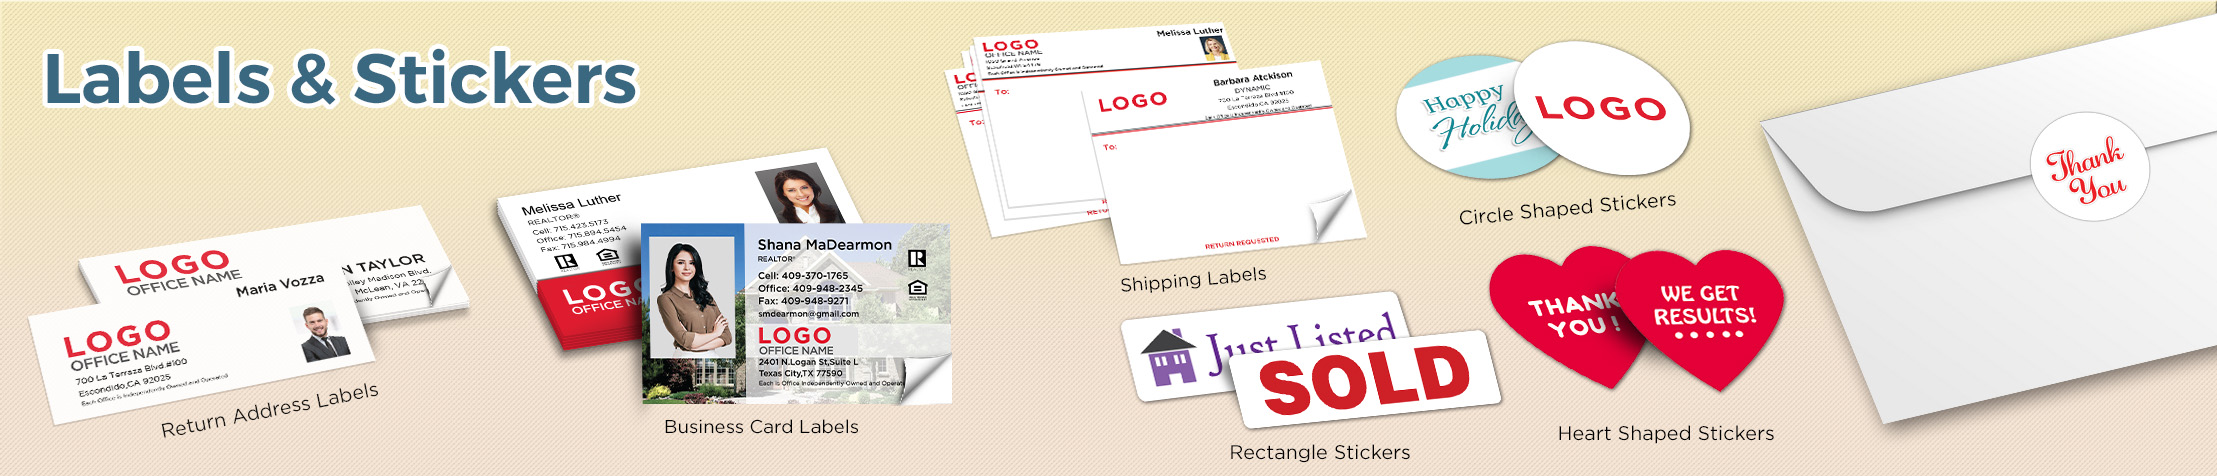 RE/MAX Real Estate Labels and Stickers - RE/MAX  business card labels, return address labels, shipping labels, and assorted stickers | BestPrintBuy.com